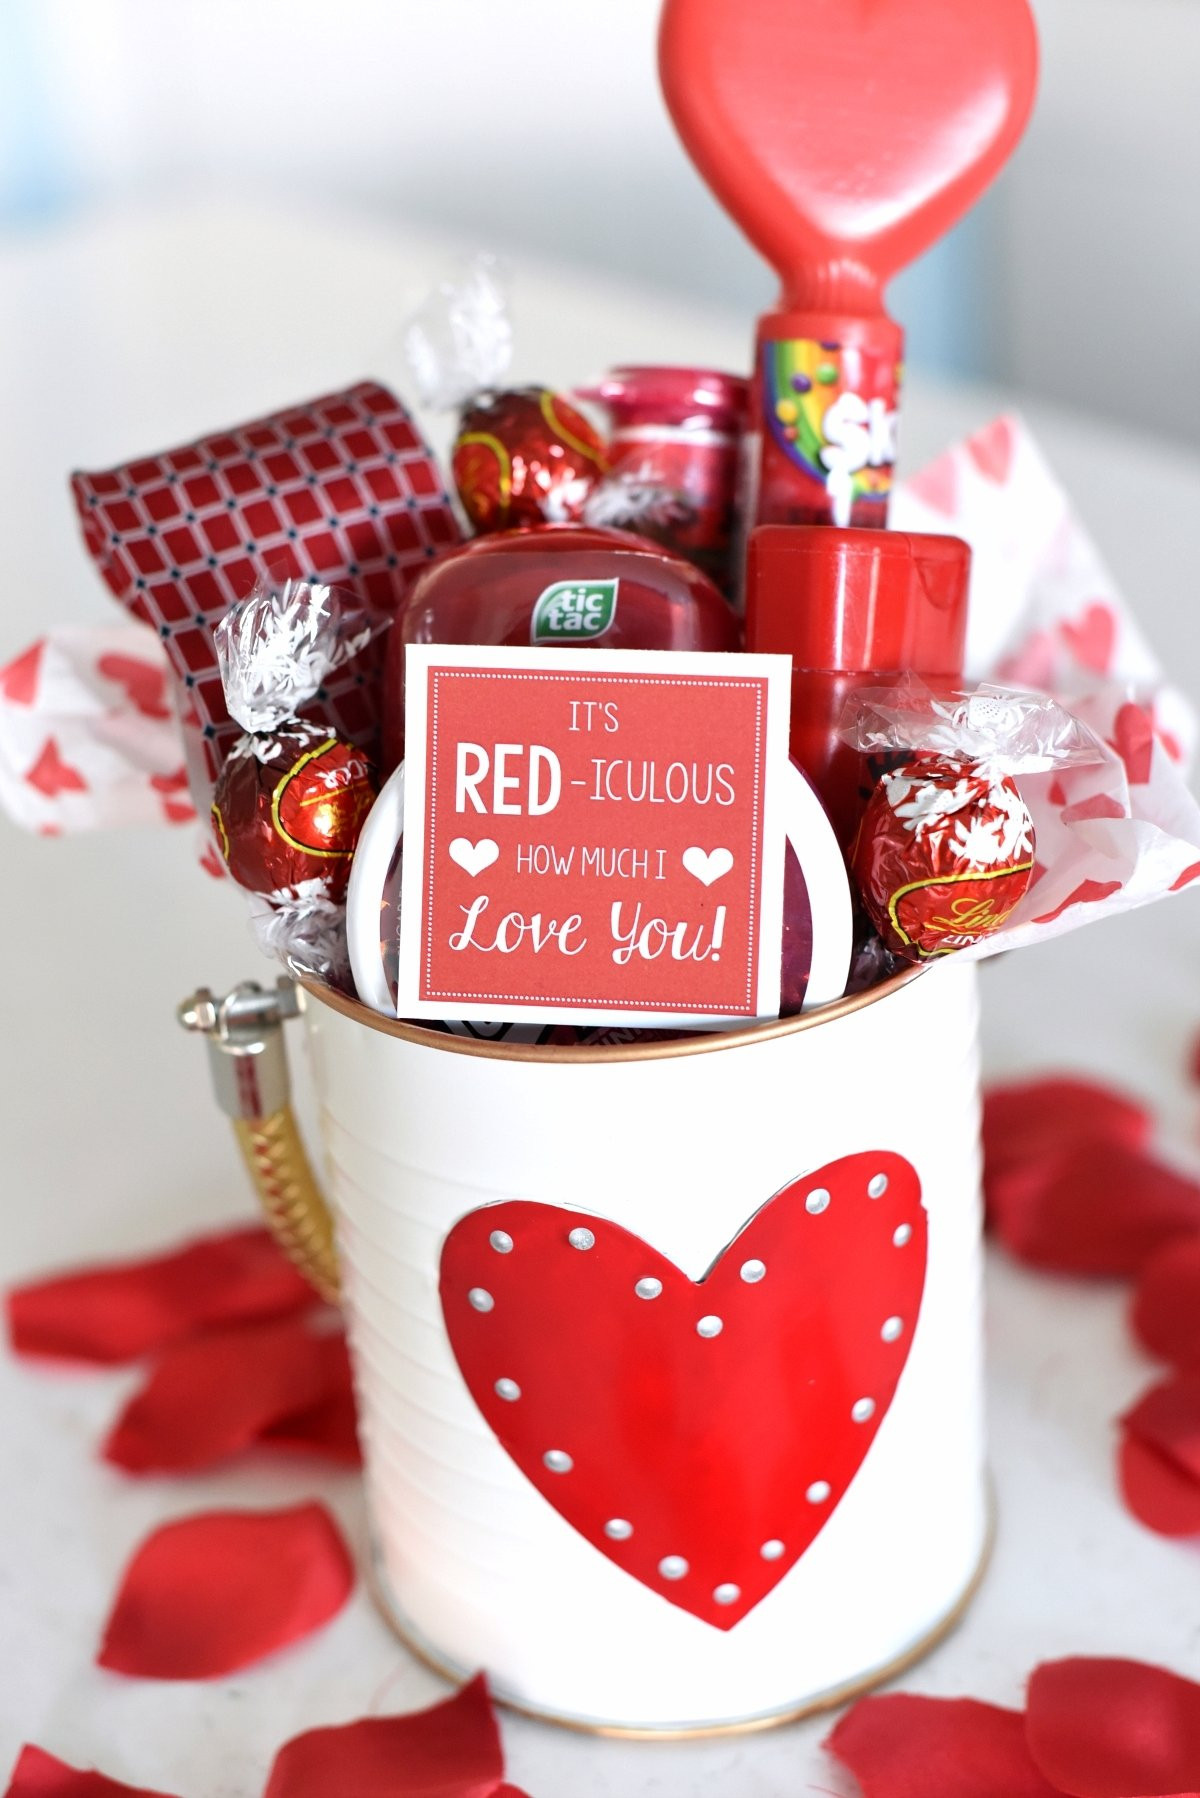 Romantic Valentine Day Gift Ideas
 10 Elegant Valentines Day Gift Ideas For Wife 2020